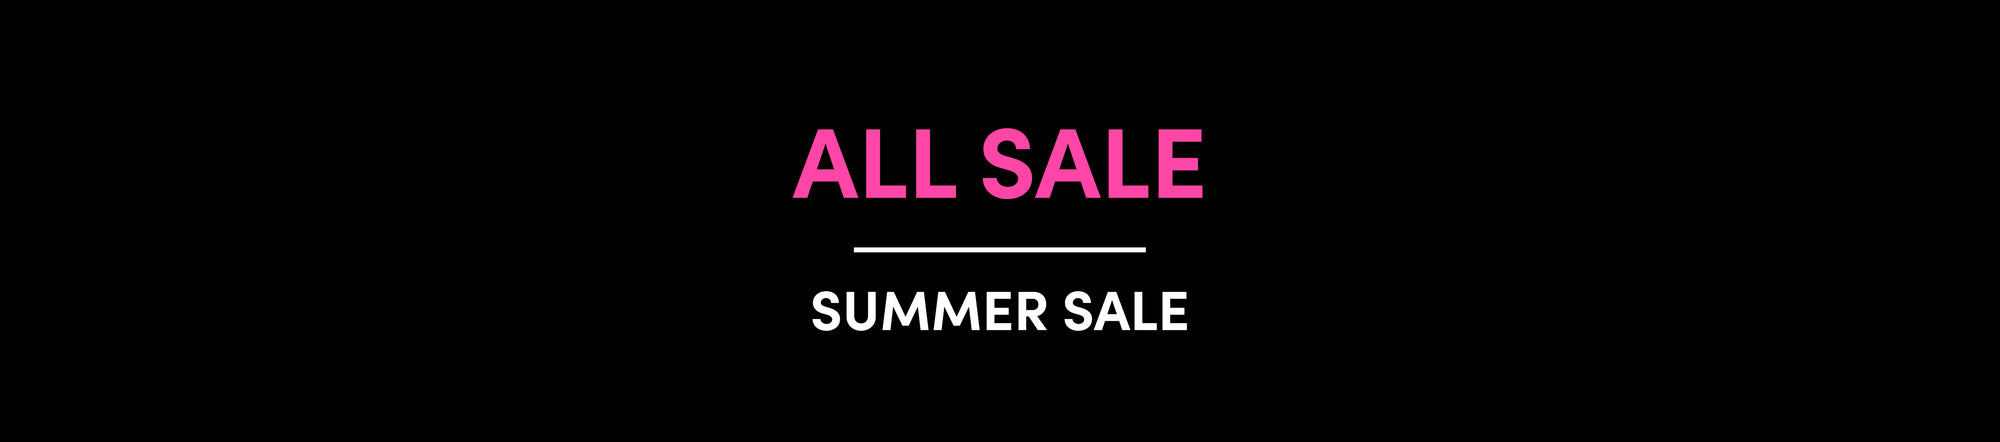 All Sale Summer Sale